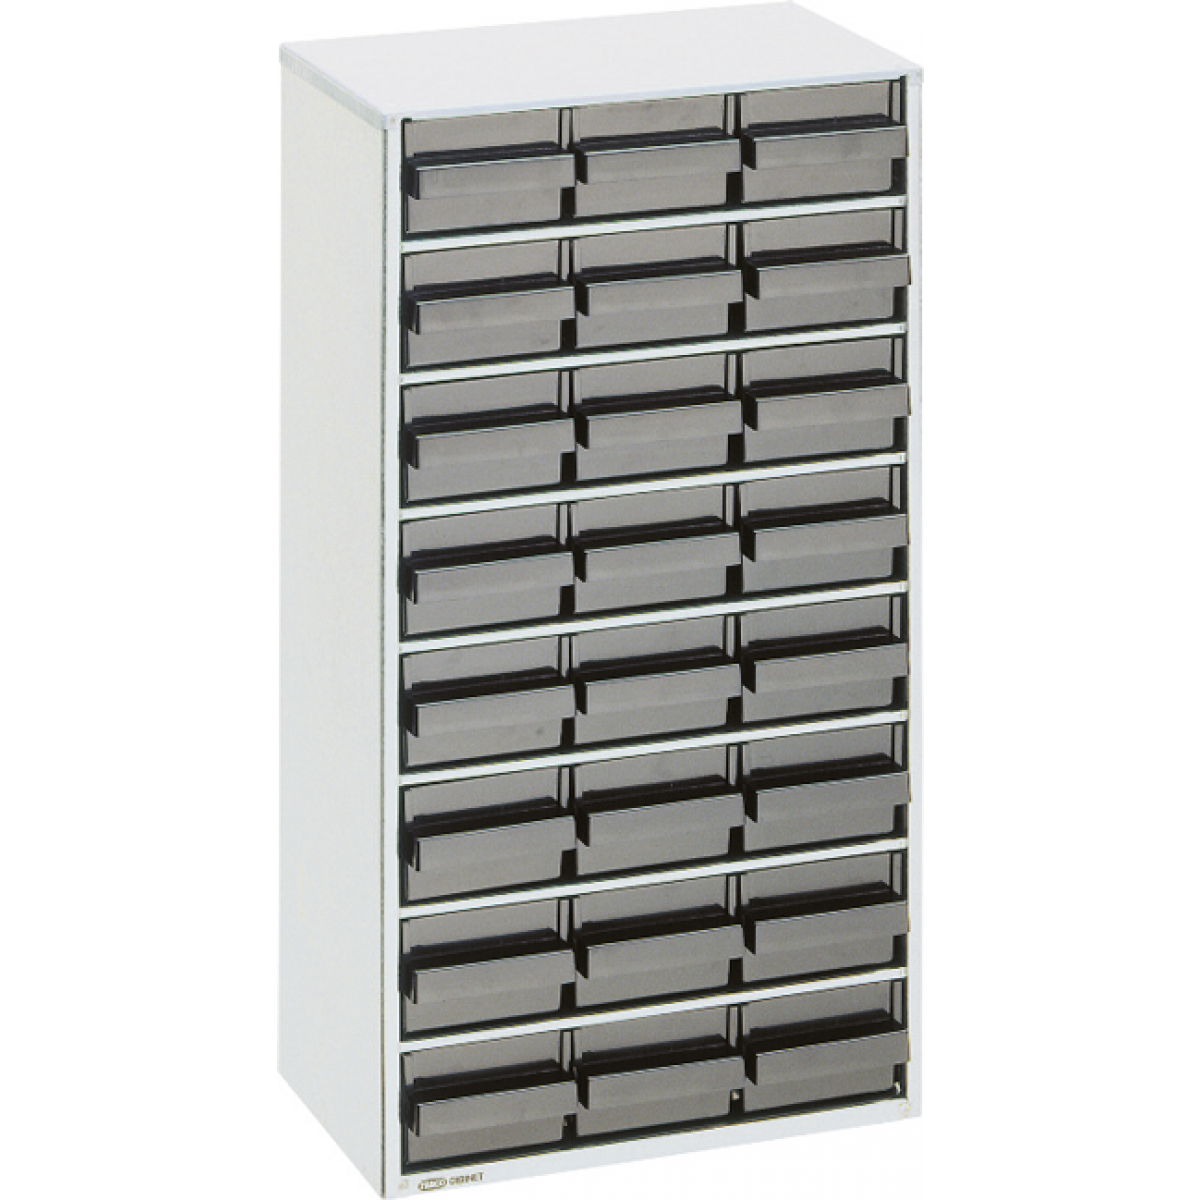 External dimensions (WxHxD):85 x 55 x 135 mm, Content:24 drawers